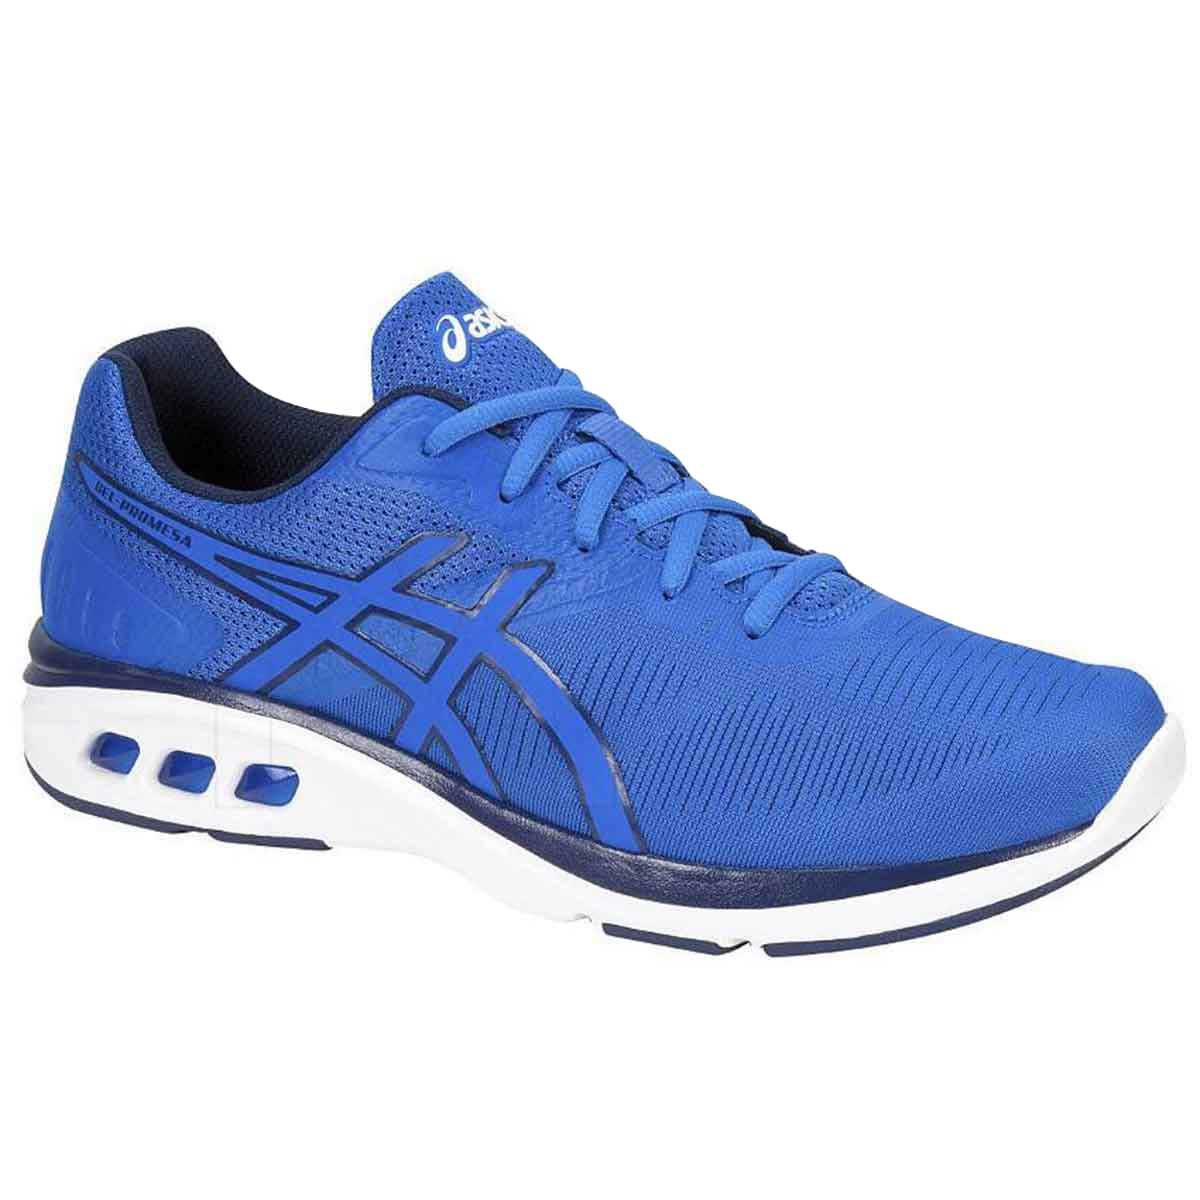 Asics Running Shoes (Victoria Blue) Online